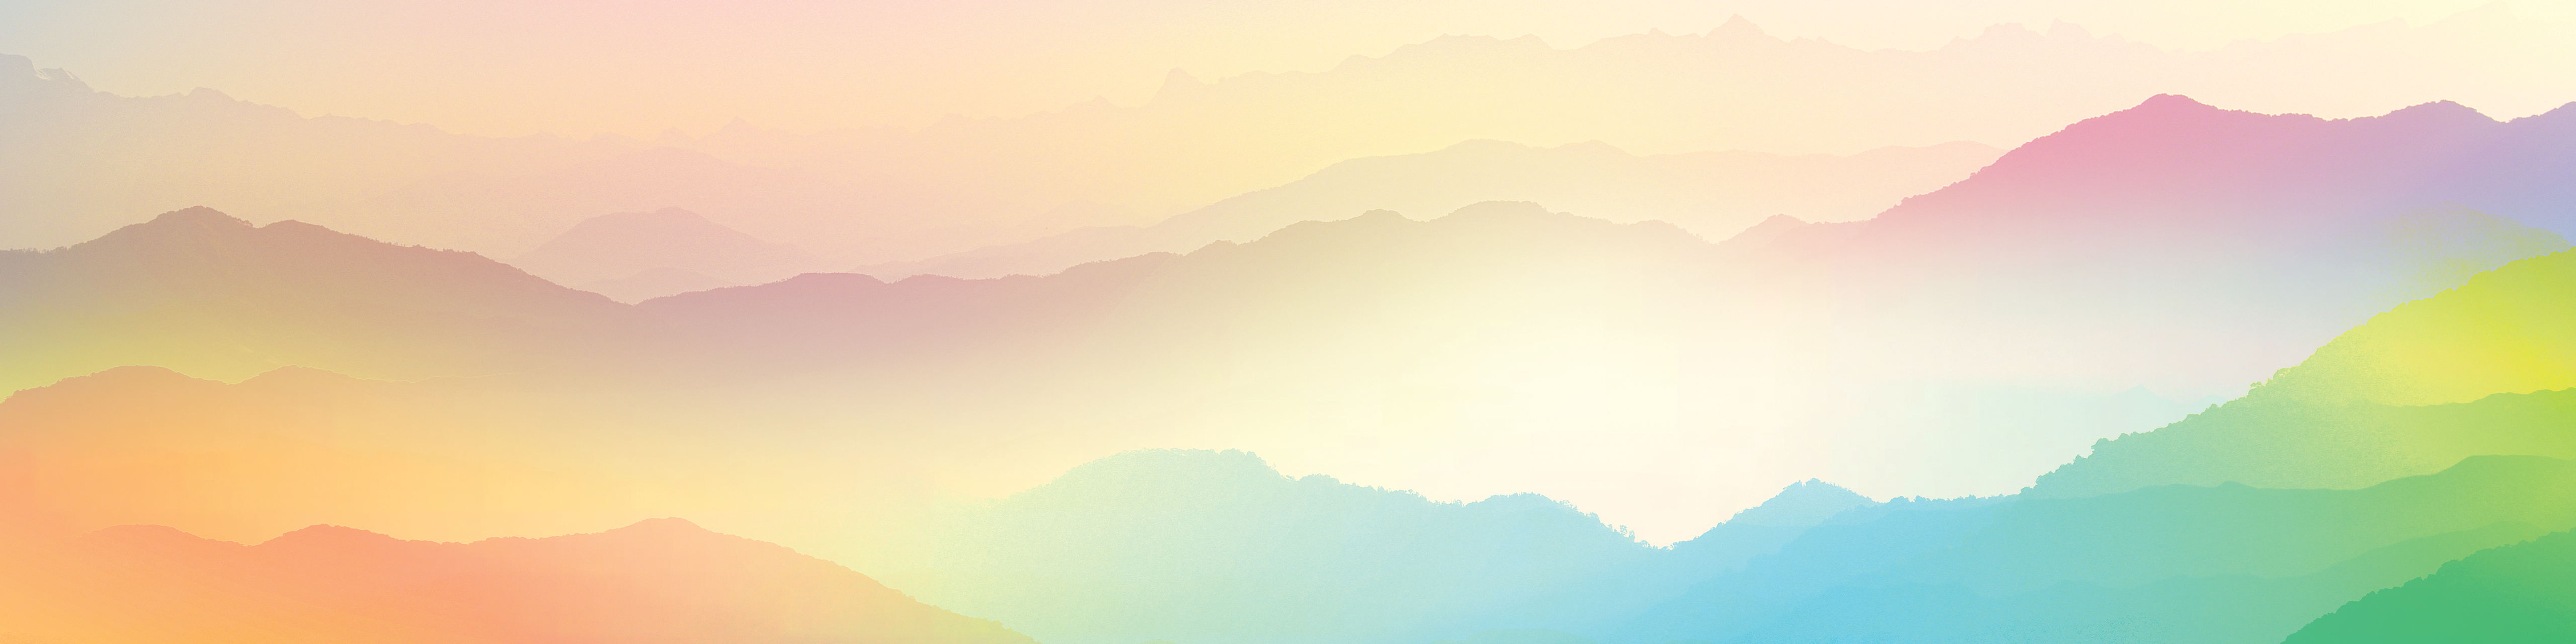 Background Abstract Misty Mountain Range Colorful Wallpaper Digital Art Gradiant Pastel Dramatic Backdrop